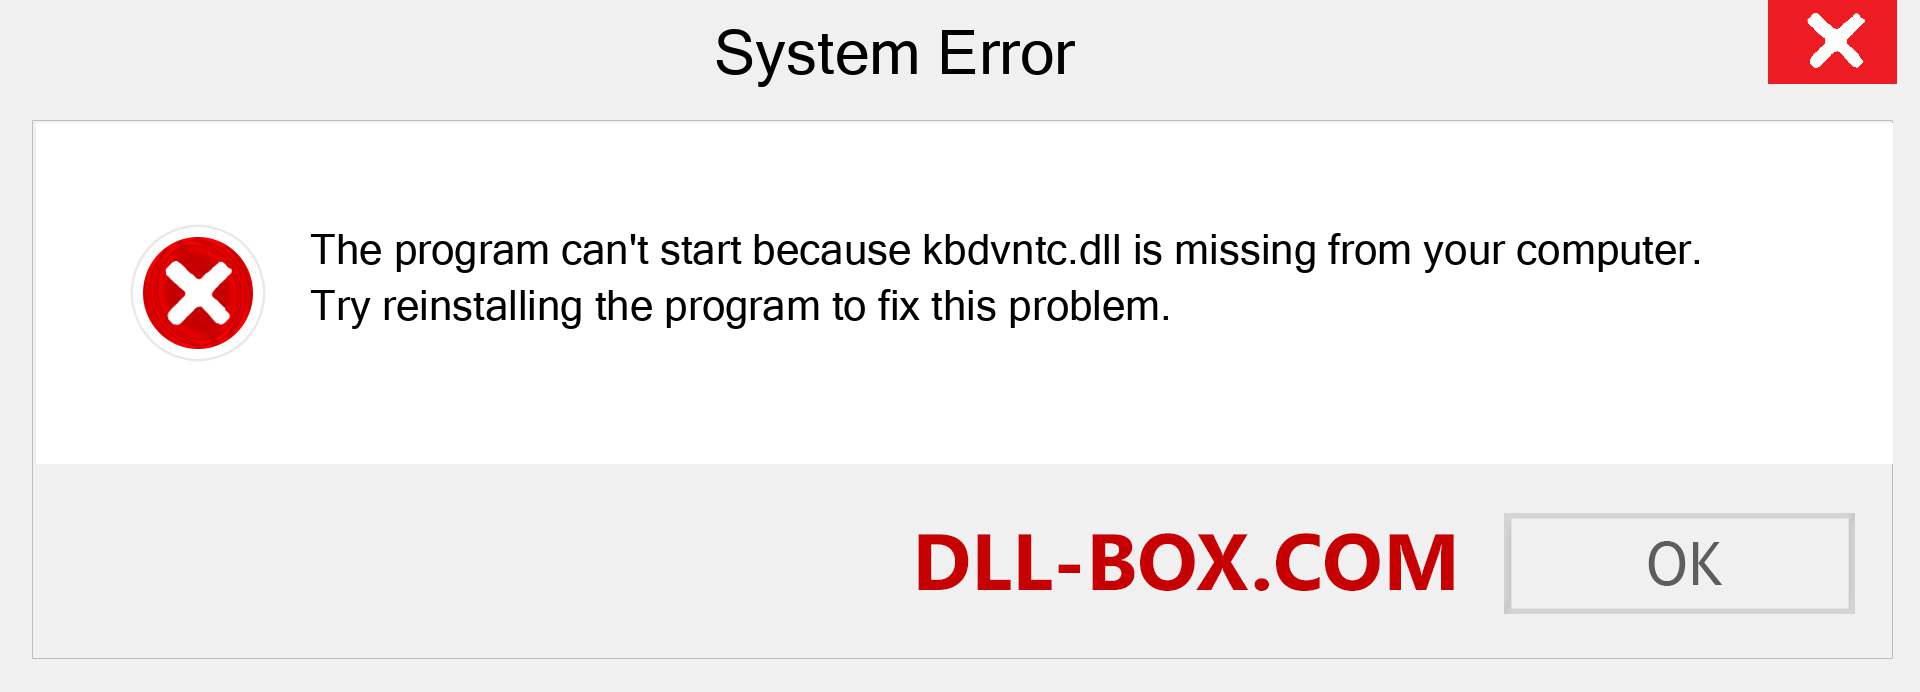  kbdvntc.dll file is missing?. Download for Windows 7, 8, 10 - Fix  kbdvntc dll Missing Error on Windows, photos, images